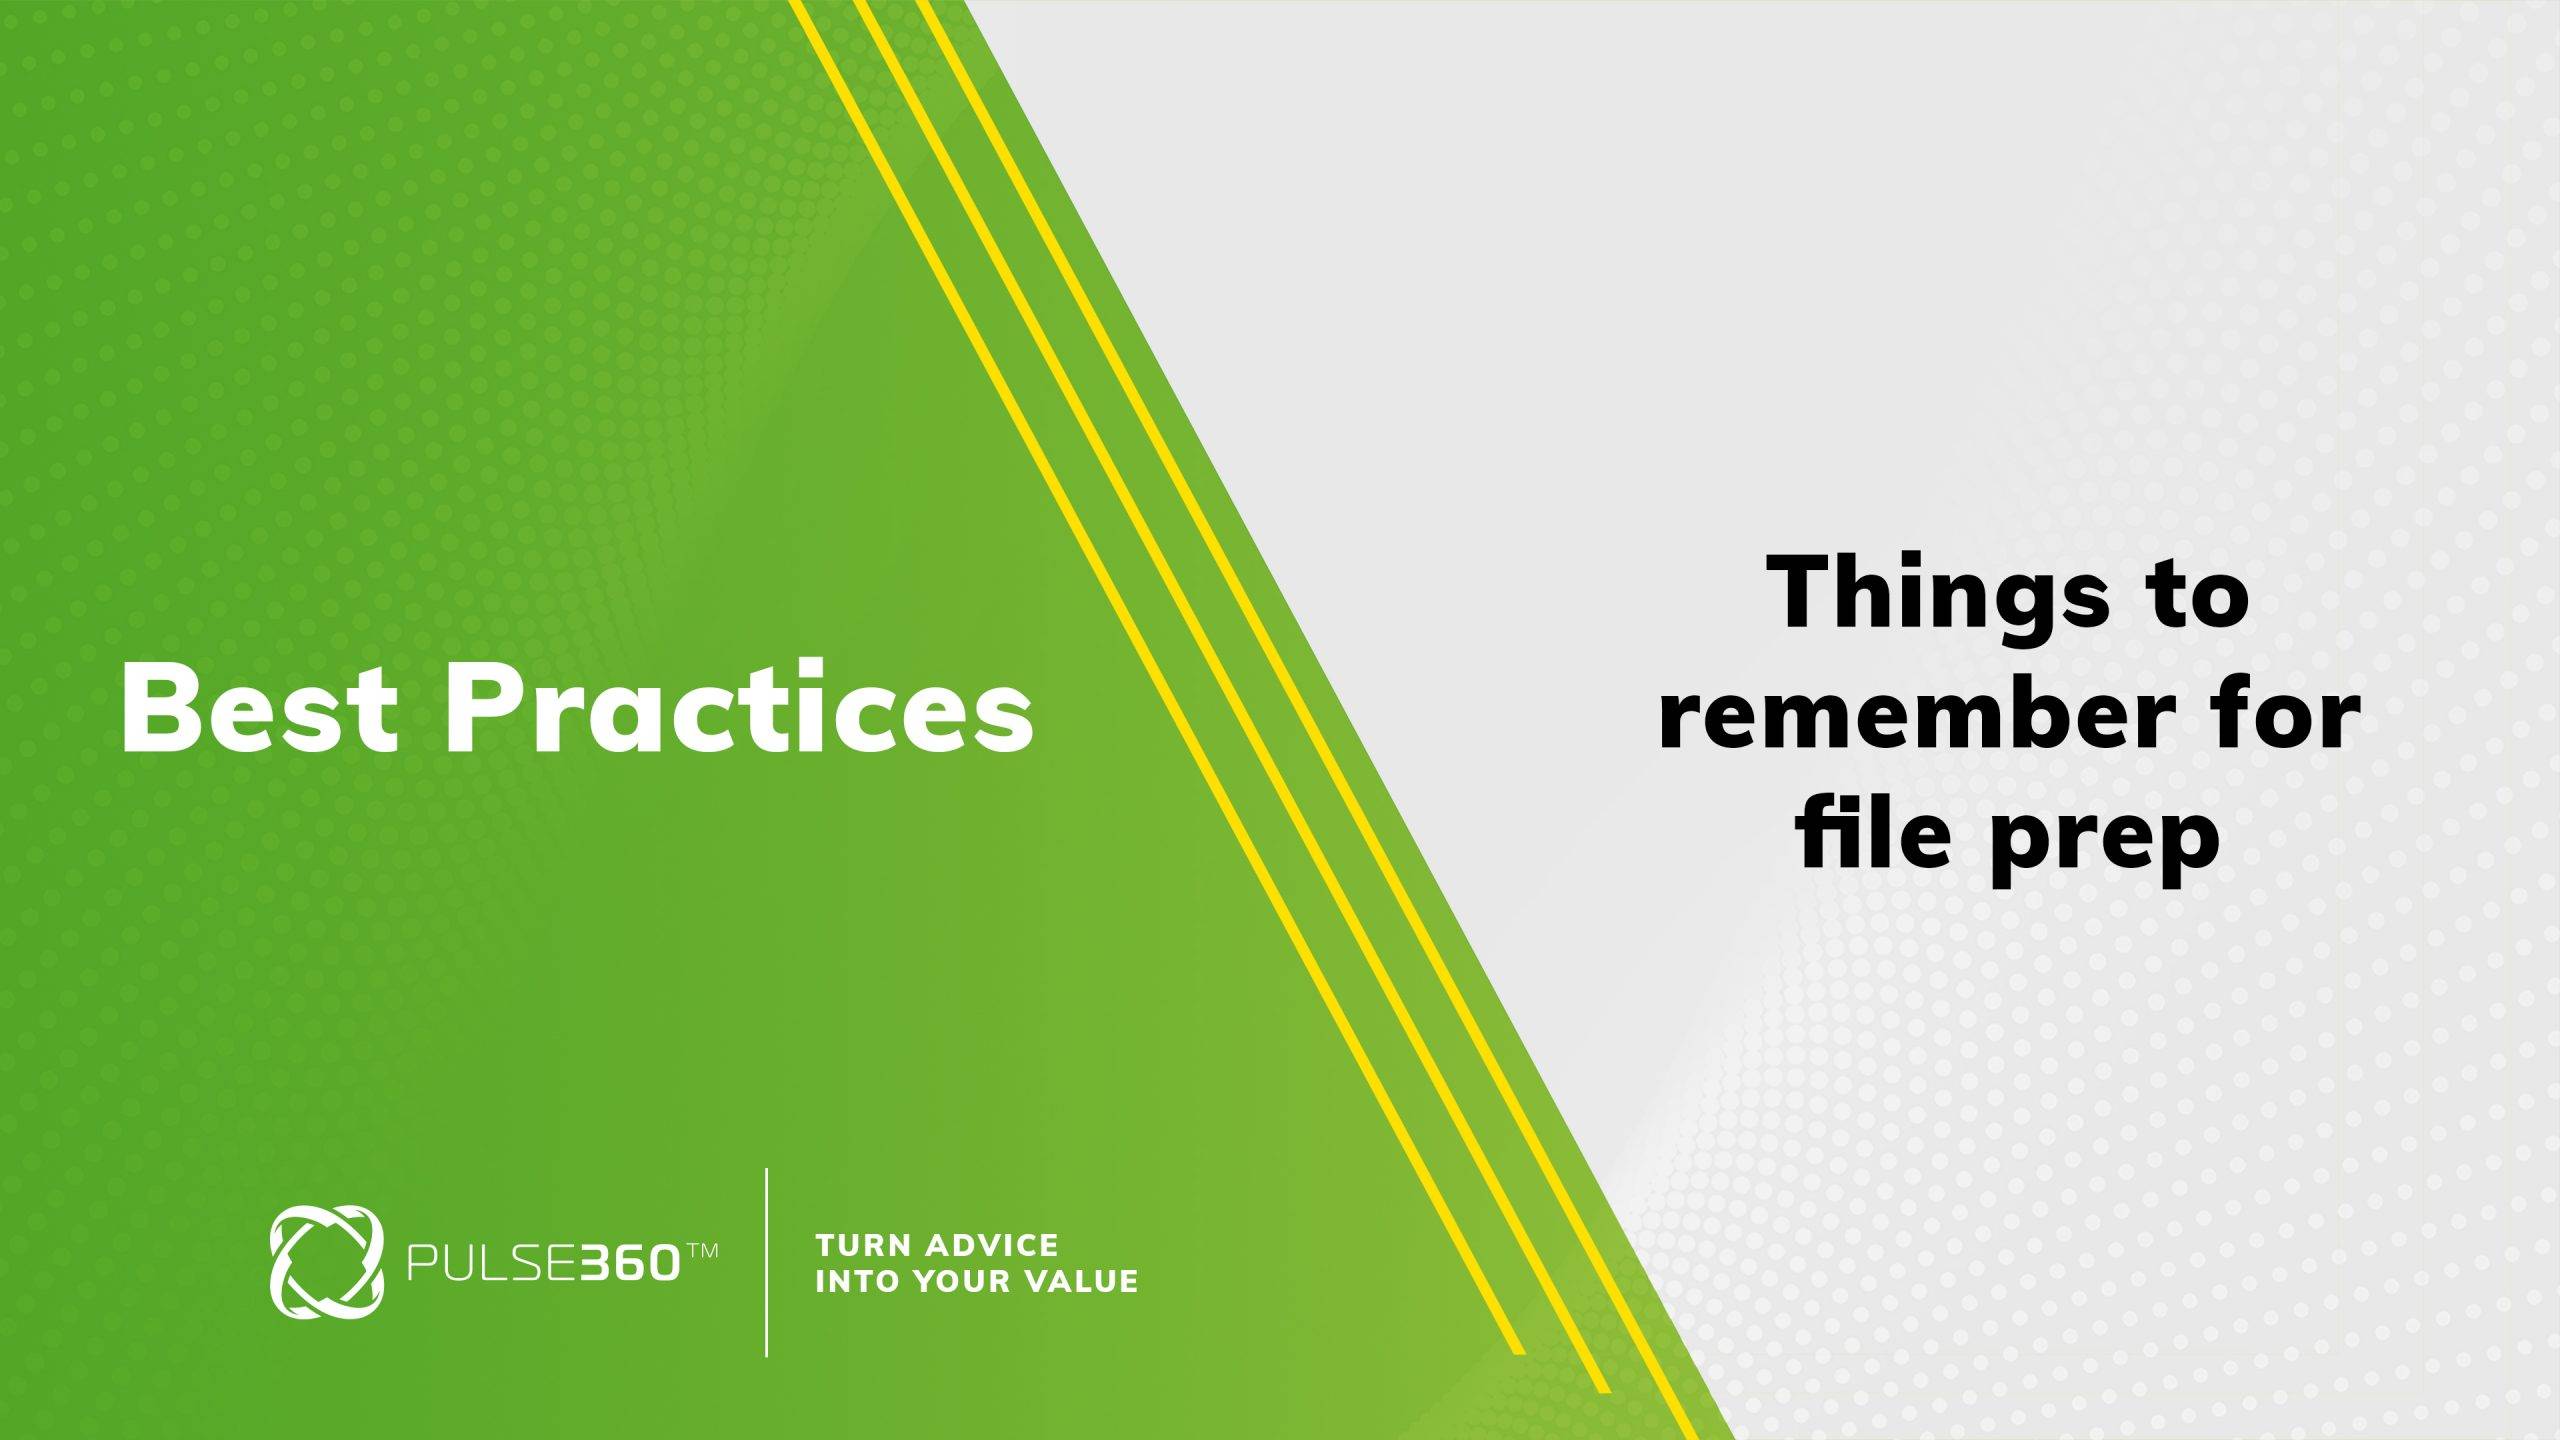 Financial Advisors, remember everything around file prep for a meeting. Practice Management Best Practices